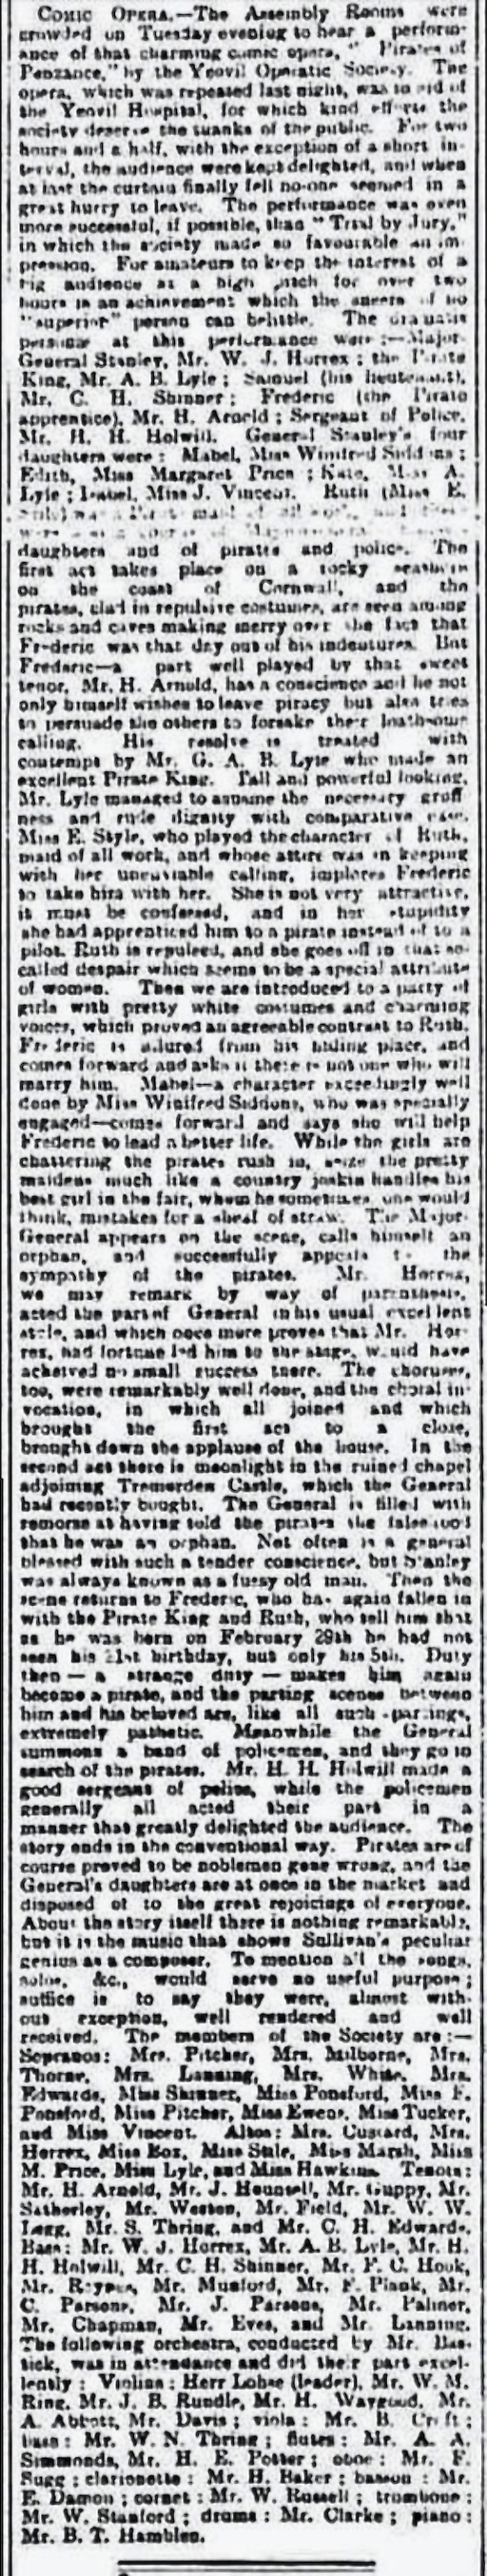 Western Chronicle 24 April 1903